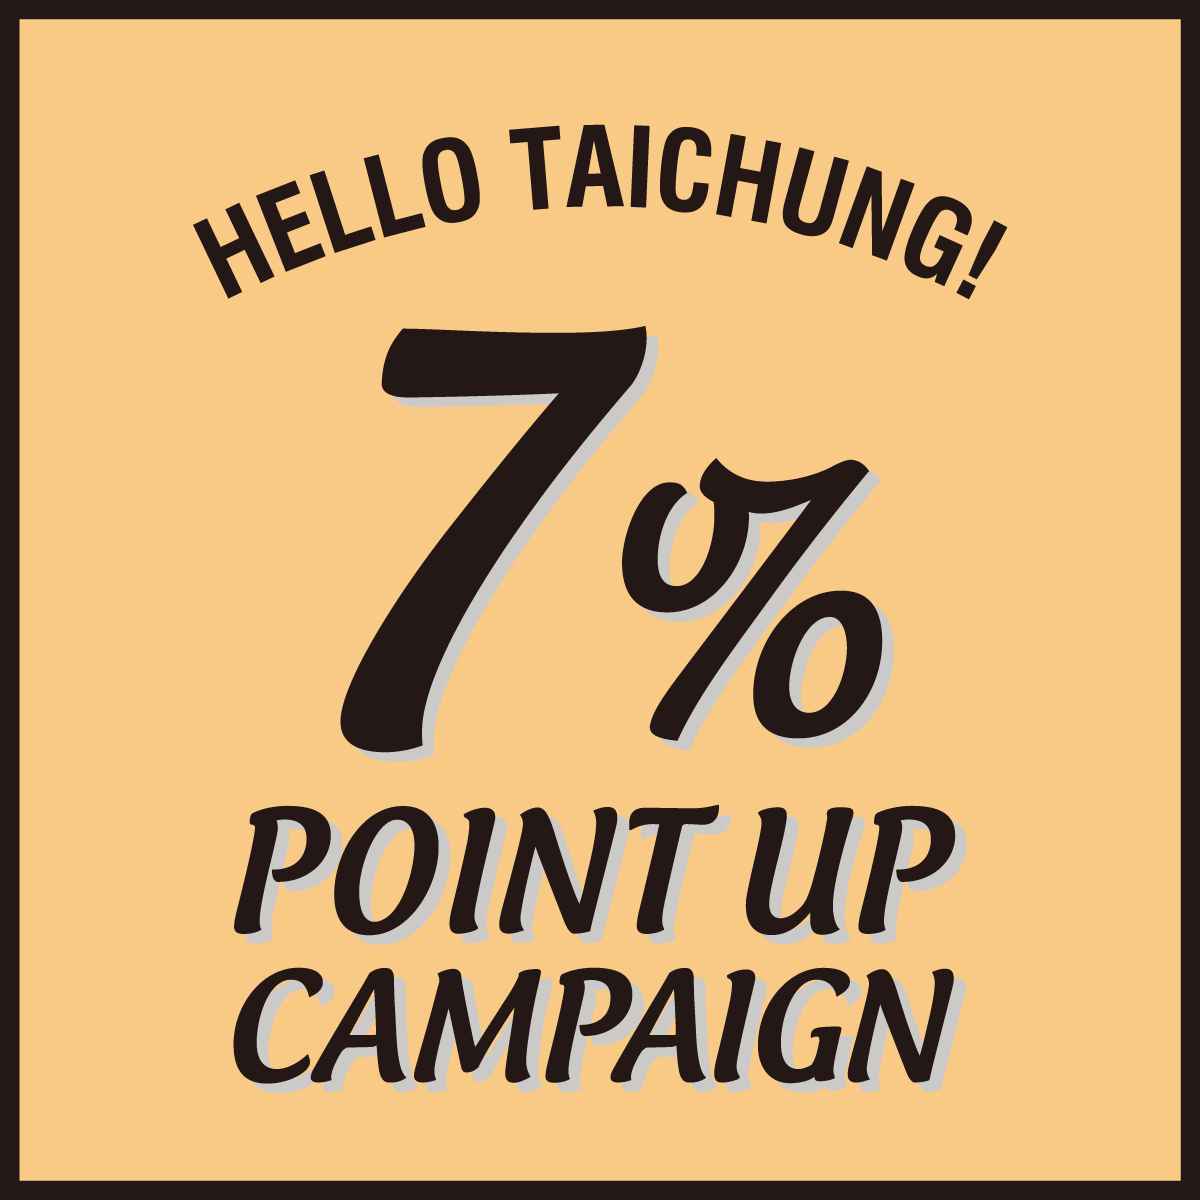 HELLO TAICHUNG ! 7% POINT CAMPAIGN